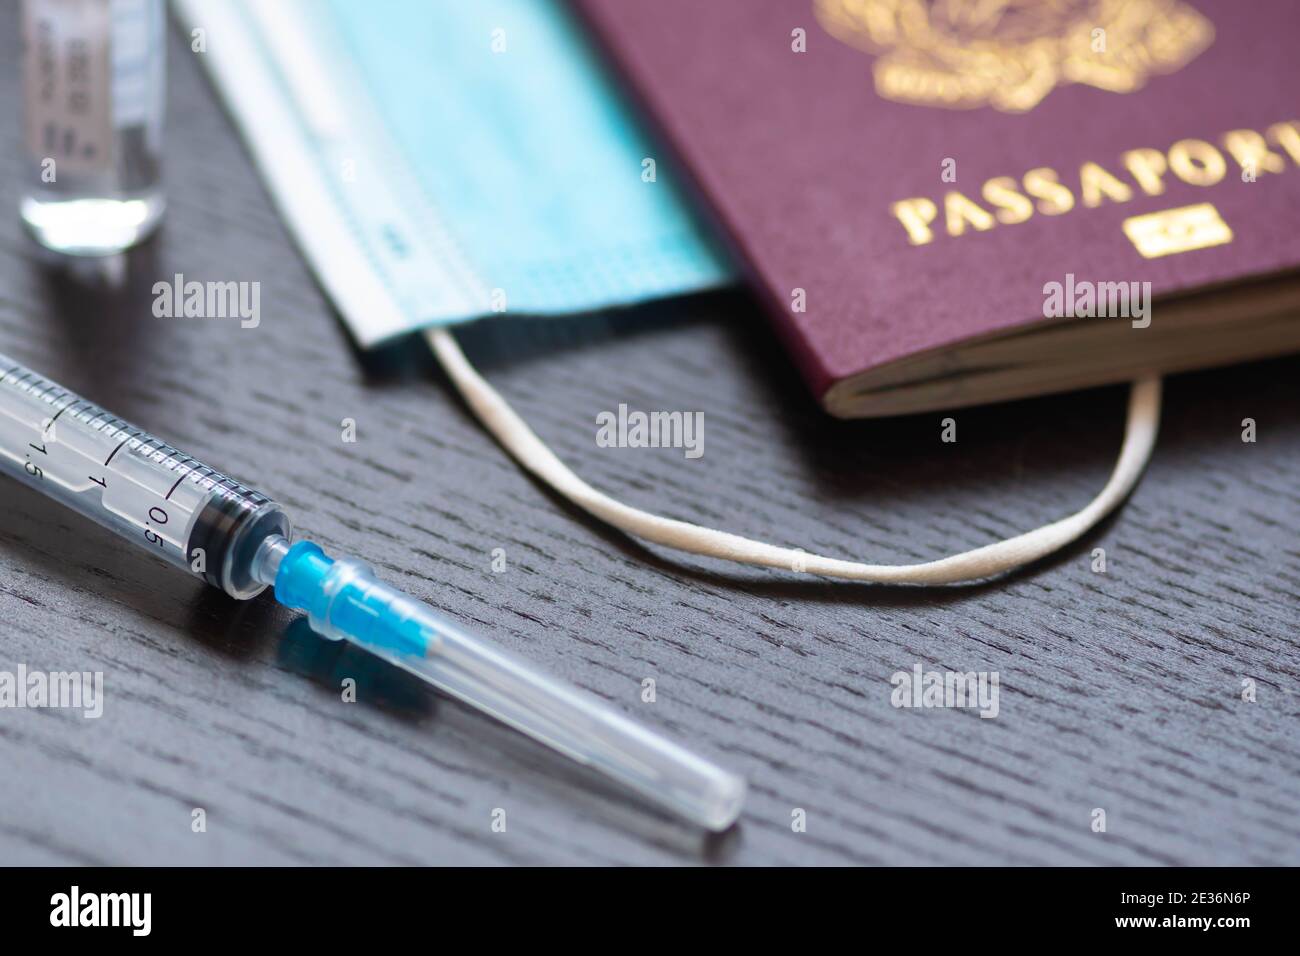 Syringe, vial, surgical face mask and passport or visa on a white table ready to be used. Covid or Coronavirus vaccine background, Covid-19 immunity p Stock Photo